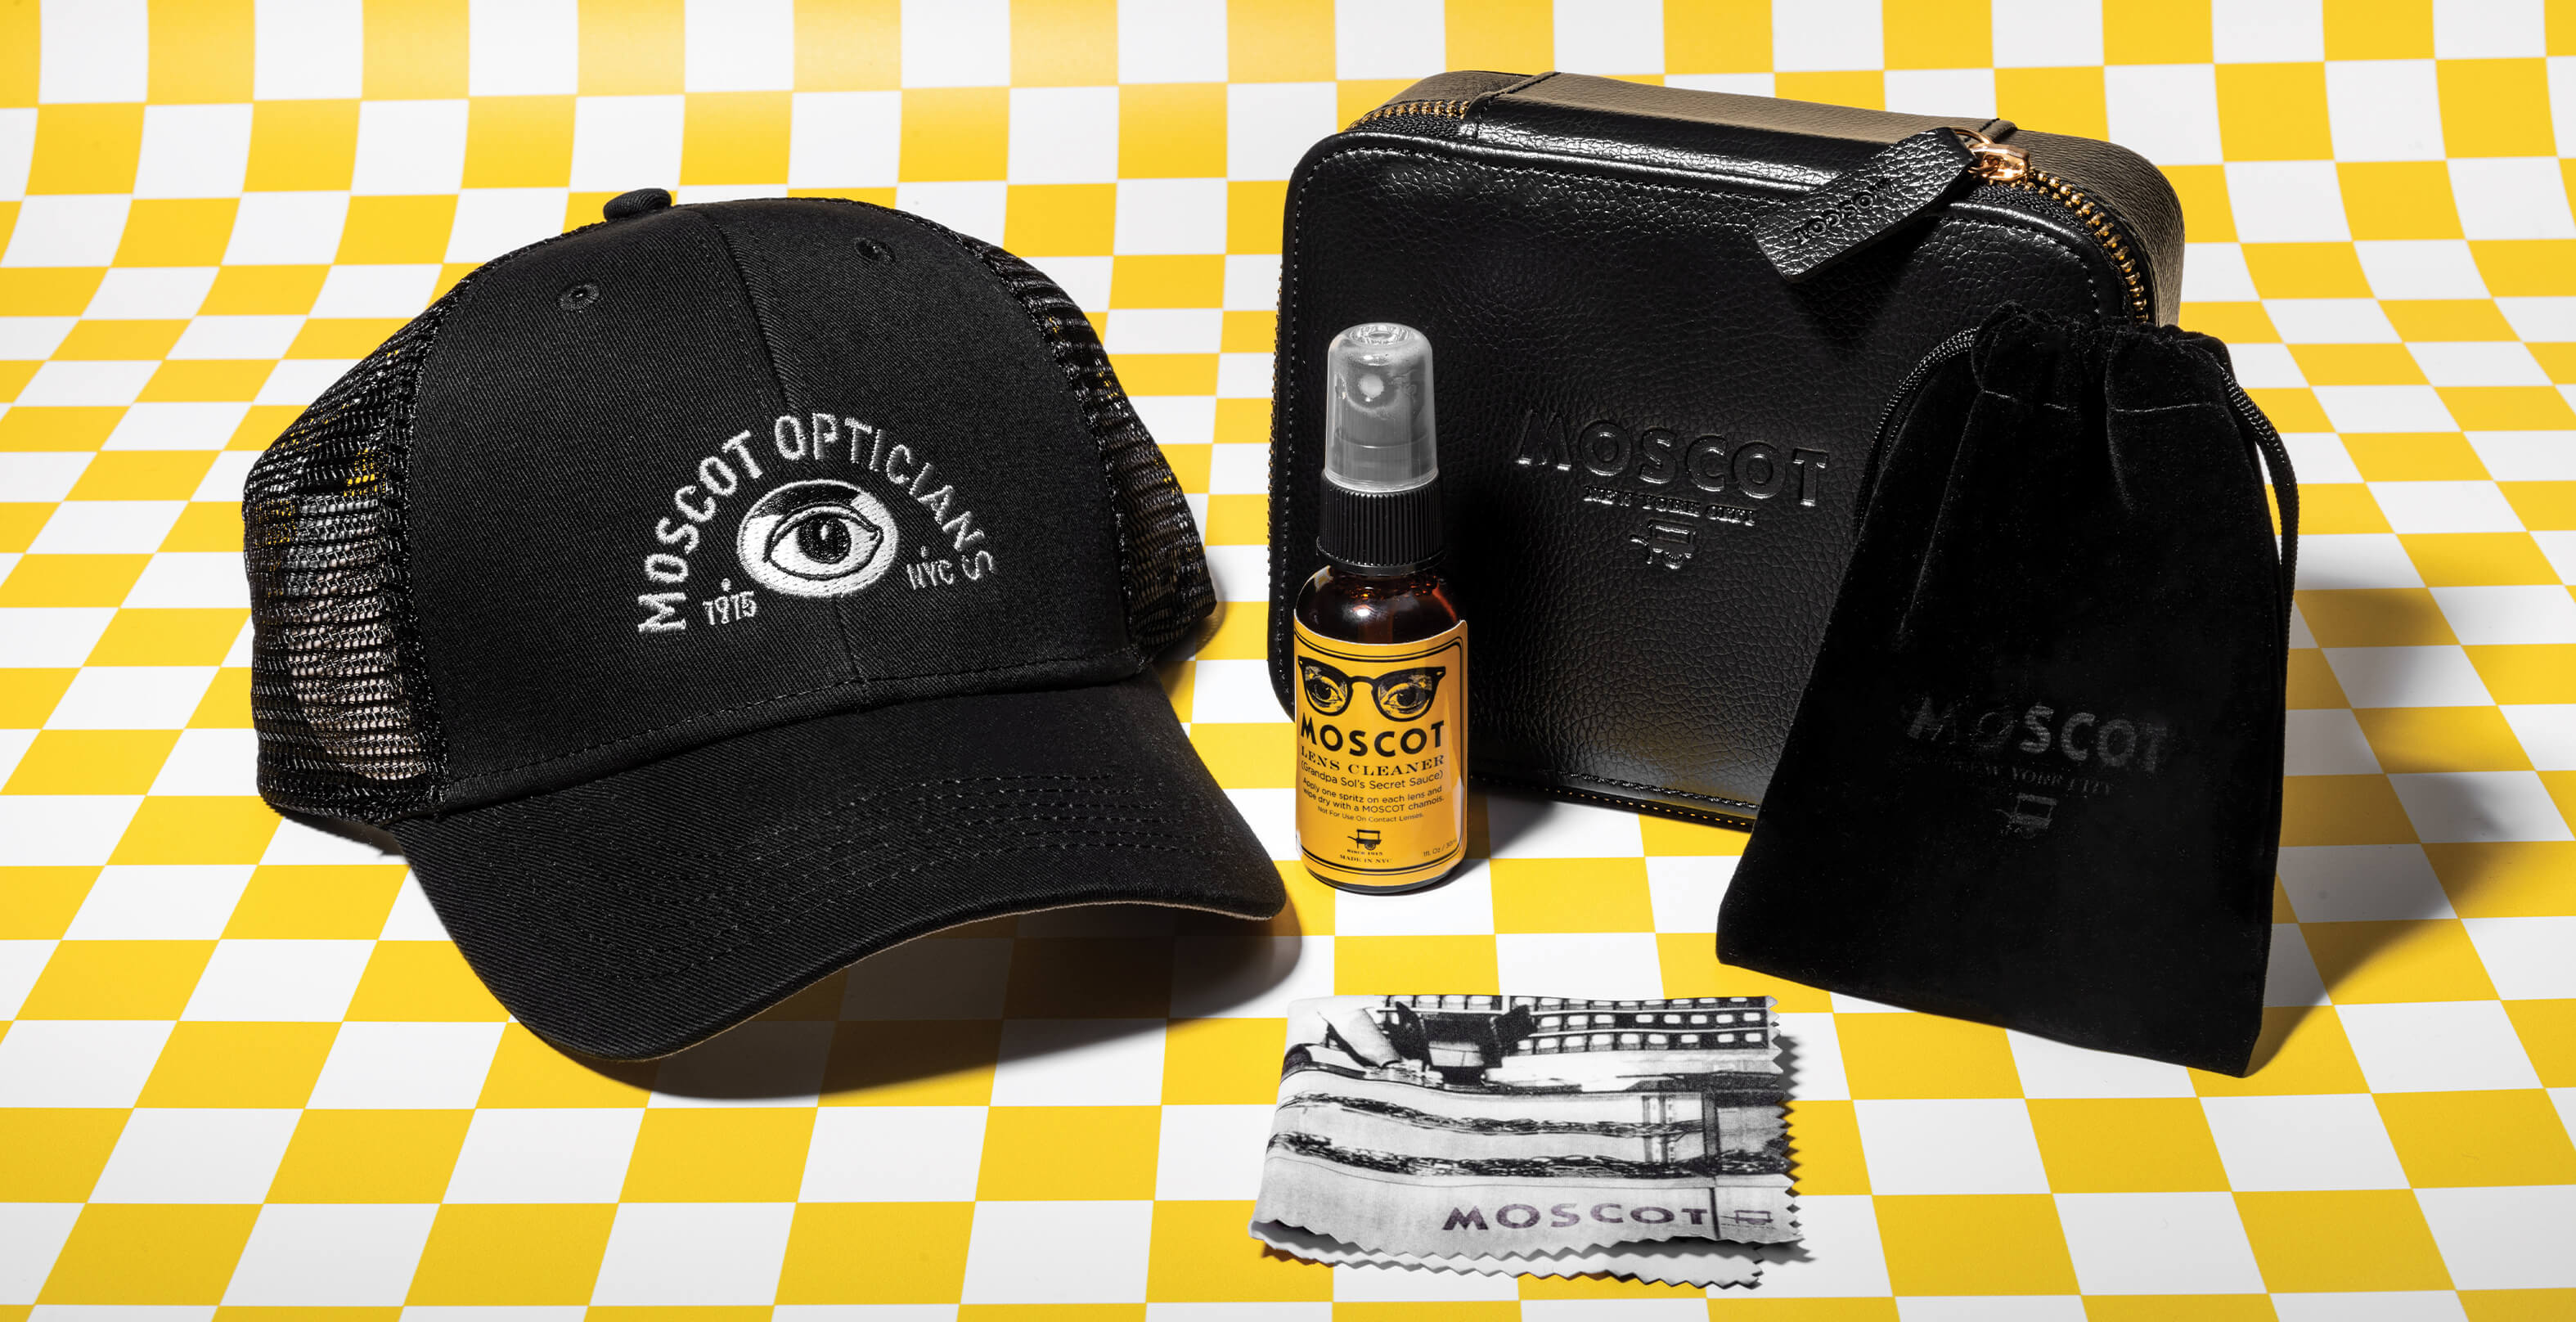 The ESSENTIALS KIT, includes The TRAVEL CASE MINI, SOL'S SECRET SAUCE, and The SNAPBACK